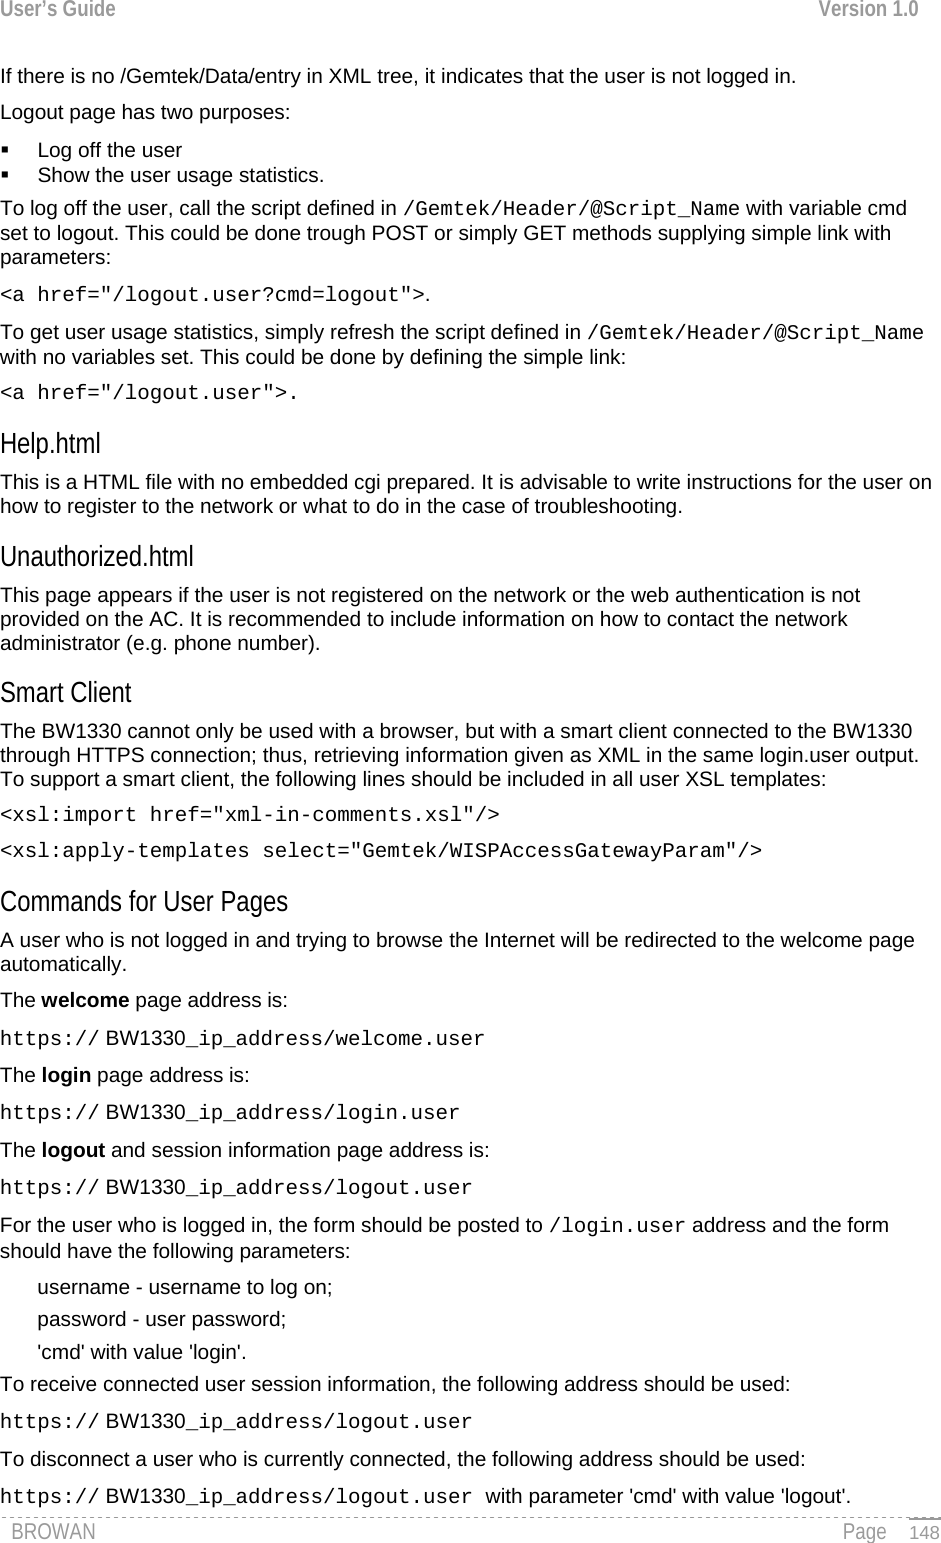 User’s Guide  Version 1.0  If there is no /Gemtek/Data/entry in XML tree, it indicates that the user is not logged in.  Logout page has two purposes:   Log off the user   Show the user usage statistics. To log off the user, call the script defined in /Gemtek/Header/@Script_Name with variable cmd set to logout. This could be done trough POST or simply GET methods supplying simple link with parameters: &lt;a href=&quot;/logout.user?cmd=logout&quot;&gt;. To get user usage statistics, simply refresh the script defined in /Gemtek/Header/@Script_Name with no variables set. This could be done by defining the simple link:  &lt;a href=&quot;/logout.user&quot;&gt;. Help.html This is a HTML file with no embedded cgi prepared. It is advisable to write instructions for the user on how to register to the network or what to do in the case of troubleshooting. Unauthorized.html This page appears if the user is not registered on the network or the web authentication is not provided on the AC. It is recommended to include information on how to contact the network administrator (e.g. phone number). Smart Client The BW1330 cannot only be used with a browser, but with a smart client connected to the BW1330 through HTTPS connection; thus, retrieving information given as XML in the same login.user output. To support a smart client, the following lines should be included in all user XSL templates: &lt;xsl:import href=&quot;xml-in-comments.xsl&quot;/&gt; &lt;xsl:apply-templates select=&quot;Gemtek/WISPAccessGatewayParam&quot;/&gt; Commands for User Pages A user who is not logged in and trying to browse the Internet will be redirected to the welcome page automatically. The welcome page address is: https:// BW1330_ip_address/welcome.user The login page address is: https:// BW1330_ip_address/login.user The logout and session information page address is: https:// BW1330_ip_address/logout.user For the user who is logged in, the form should be posted to /login.user address and the form should have the following parameters: username - username to log on; password - user password; &apos;cmd&apos; with value &apos;login&apos;. To receive connected user session information, the following address should be used: https:// BW1330_ip_address/logout.user To disconnect a user who is currently connected, the following address should be used: BROWAN                                                                                                                                               Page https:// BW1330_ip_address/logout.user with parameter &apos;cmd&apos; with value &apos;logout&apos;.   148